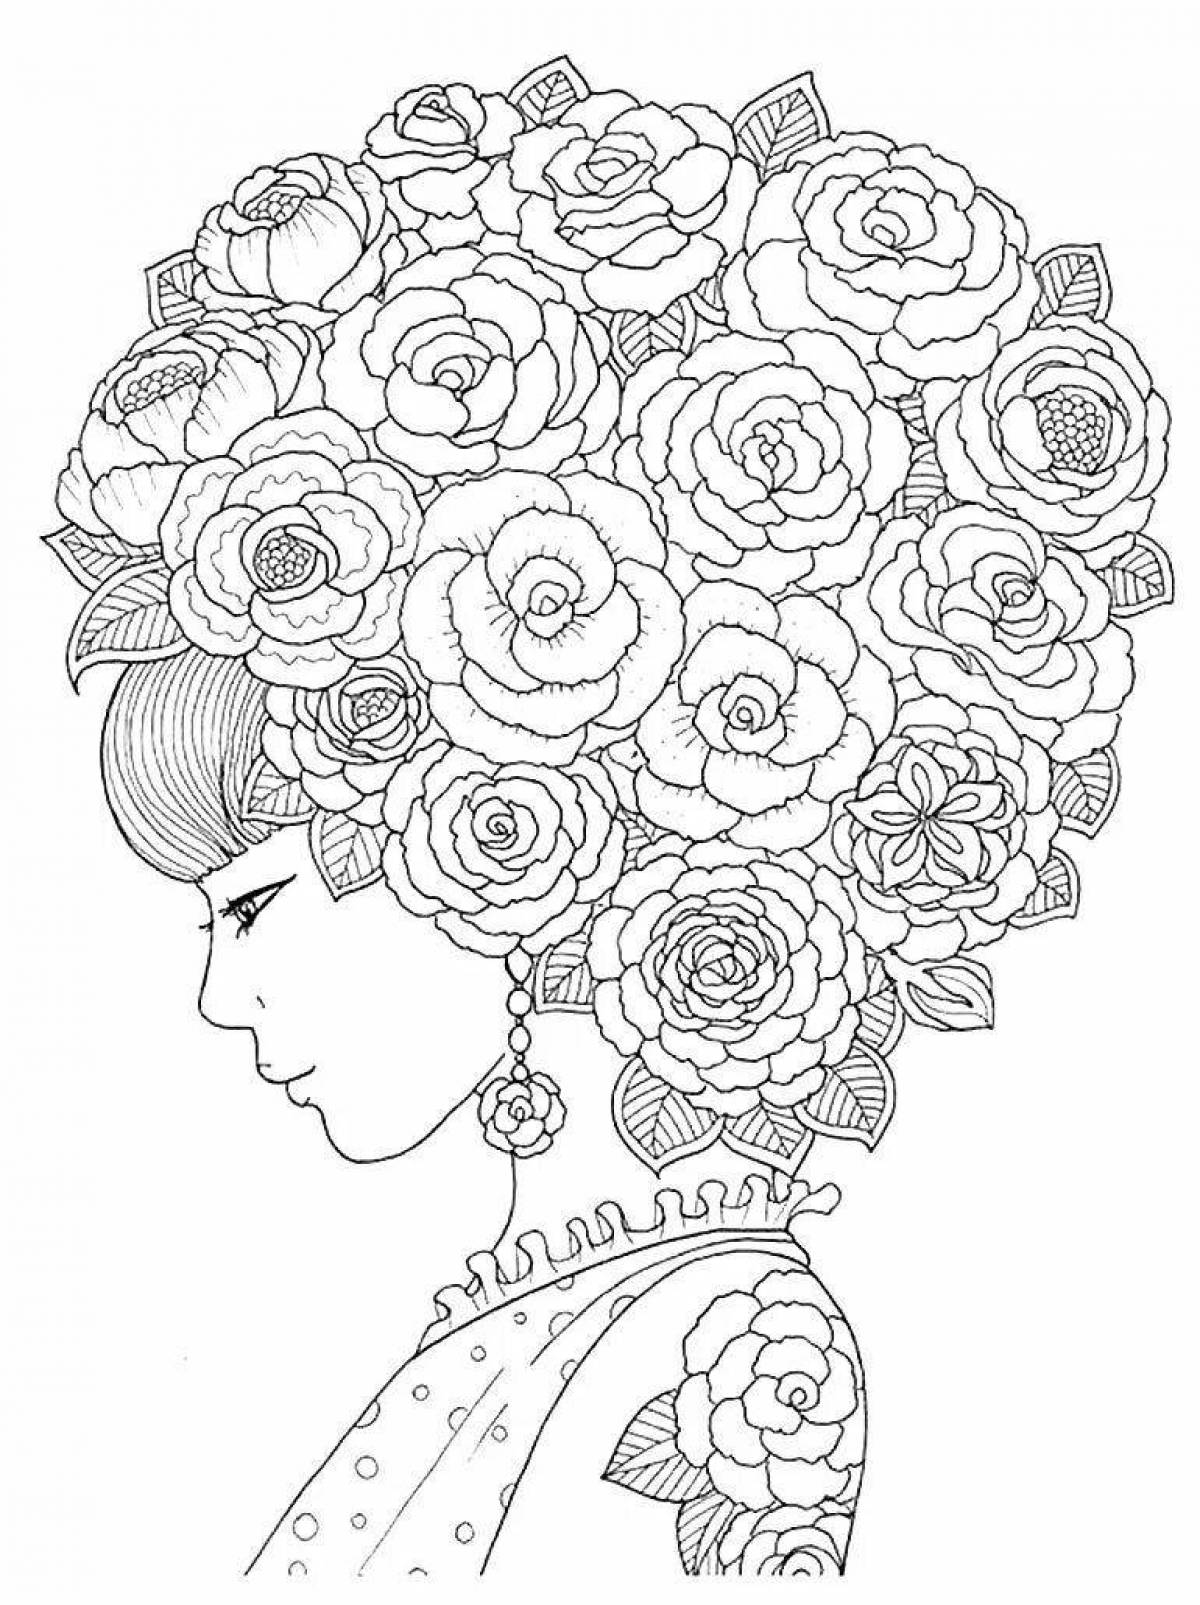 Stimulating anti-stress coloring book for women